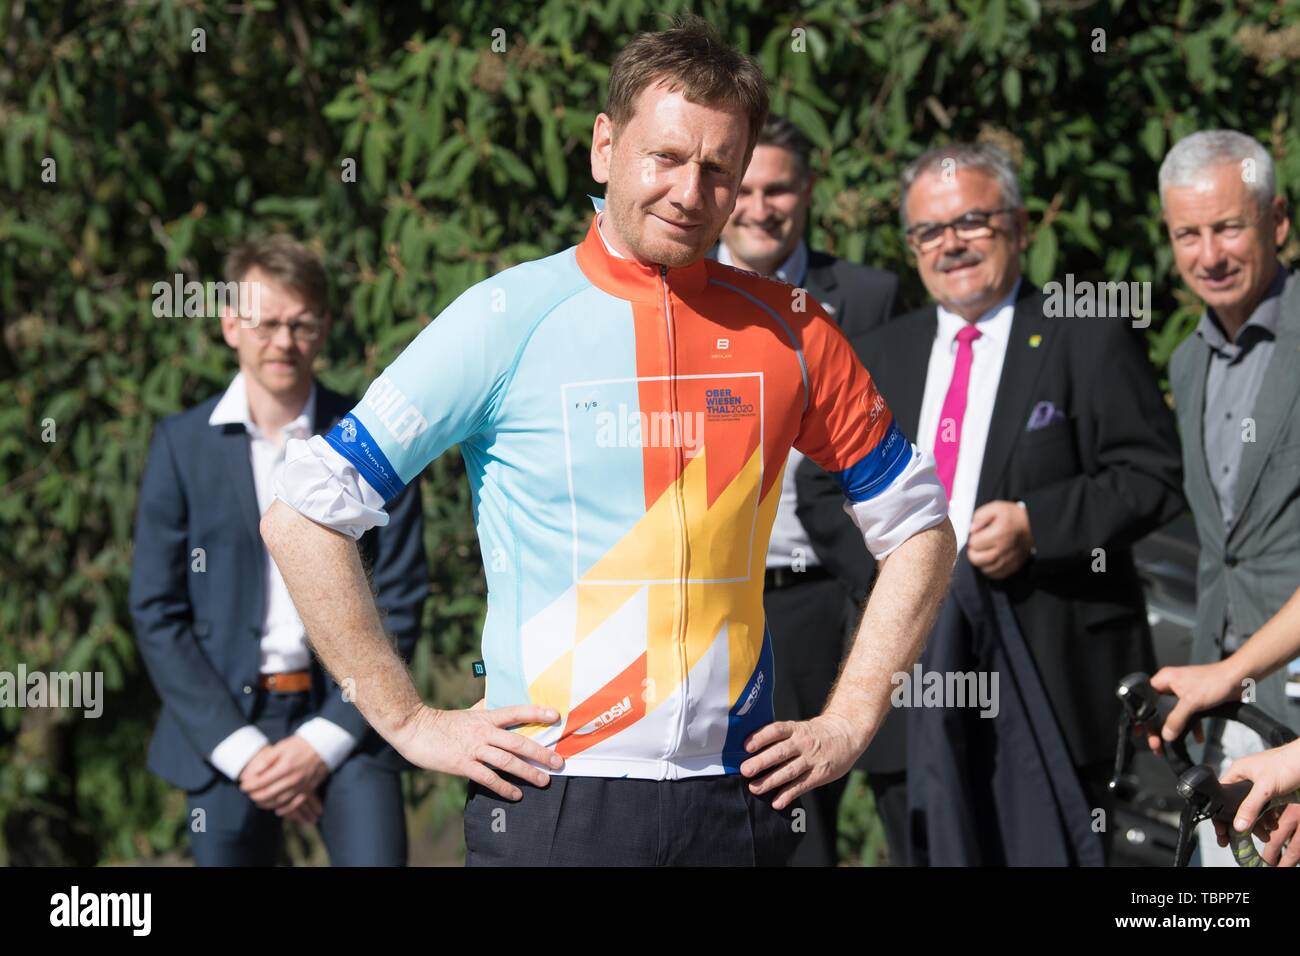 Dresden, Germany. 03rd June, 2019. Michael Kretschmer (CDU), Prime Minister of Saxony, wears a cycling jersey for the start of the summer cycle tour for the upcoming Nordic Junior World Championship 2020 in Oberwiesenthal, Saxony. On the same day, organisers and athletes from Dresden will start by bicycle in the direction of Oberwiesenthal to draw attention to this major event. Credit: Sebastian Kahnert/dpa-Zentralbild/ZB/dpa/Alamy Live News Stock Photo